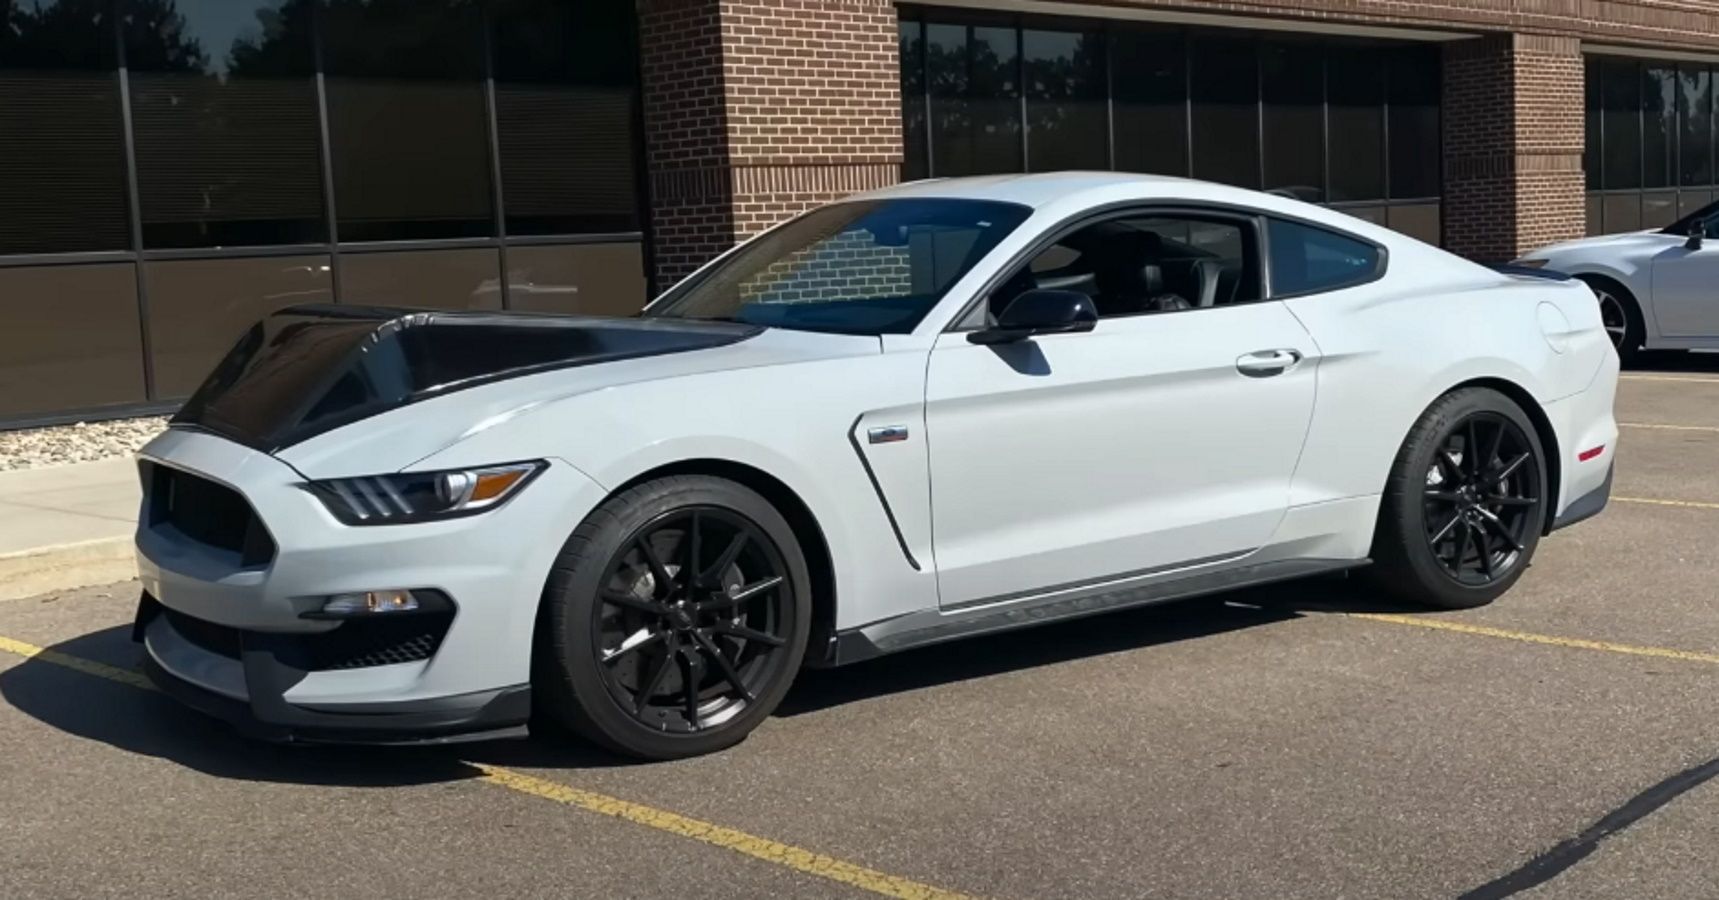 A Ford Mustang test mule may house the Megazilla engine